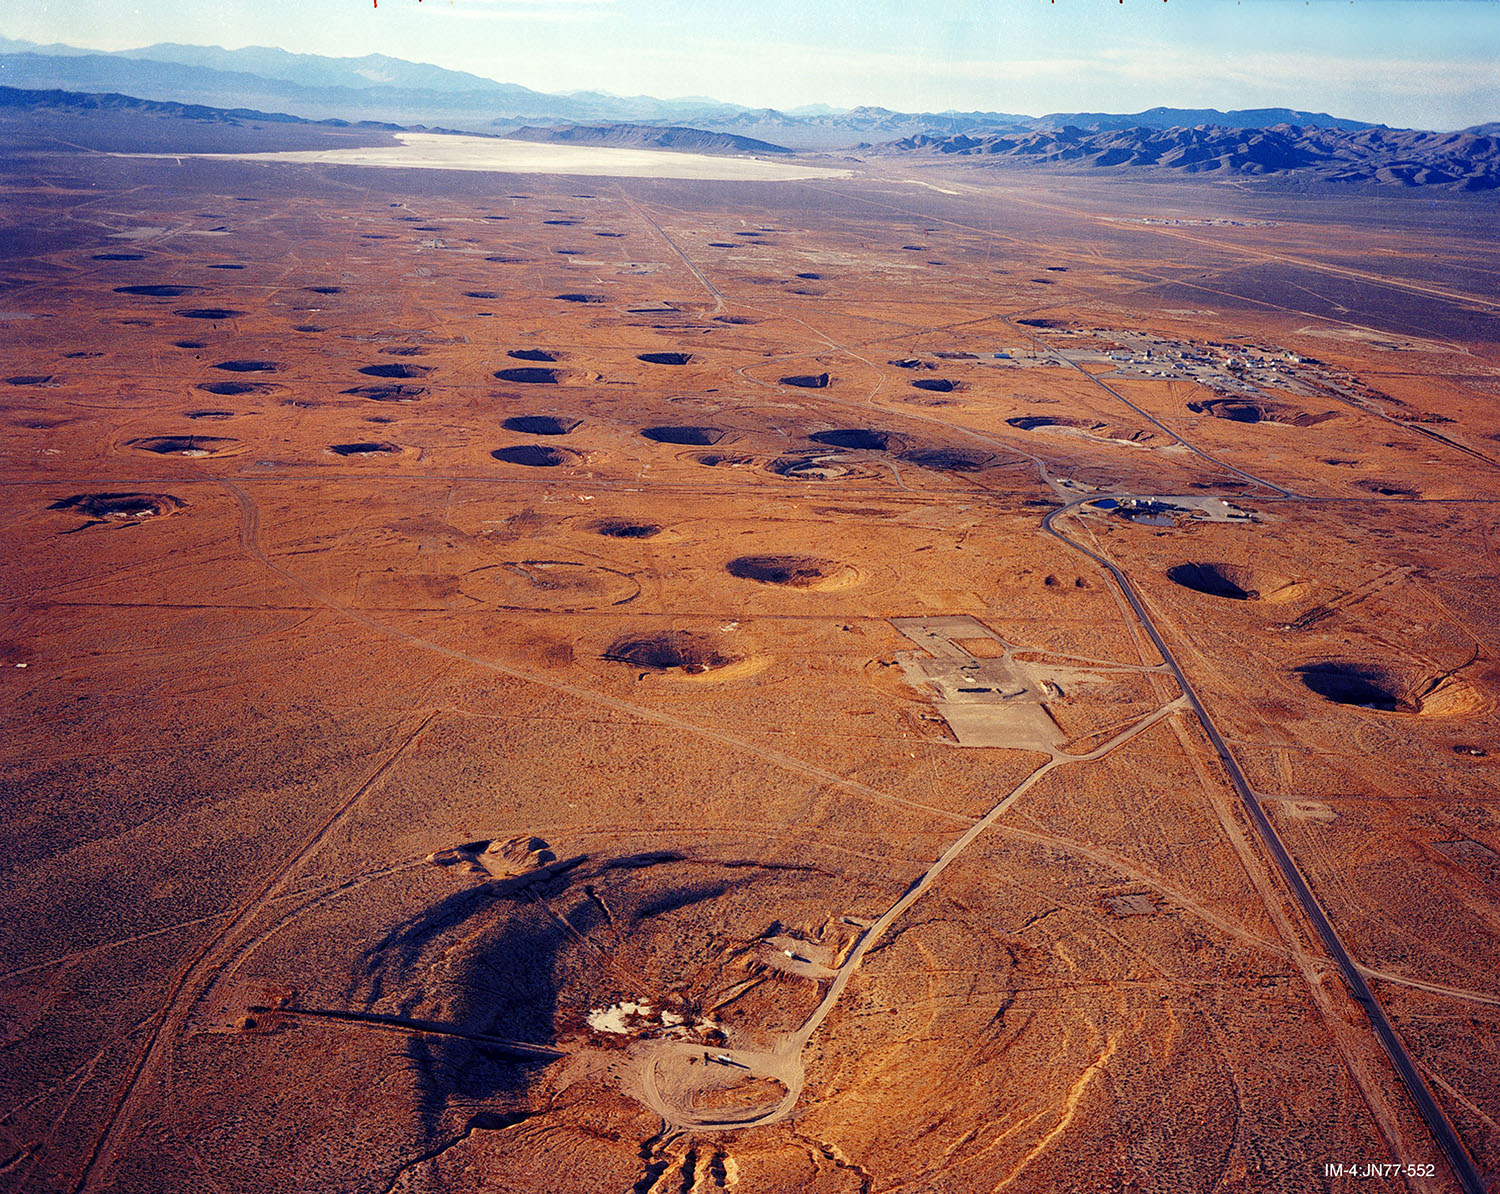 Test craters at the Nevada Test Site. Image courtesy of Los Alamos National Laboratory Archives.